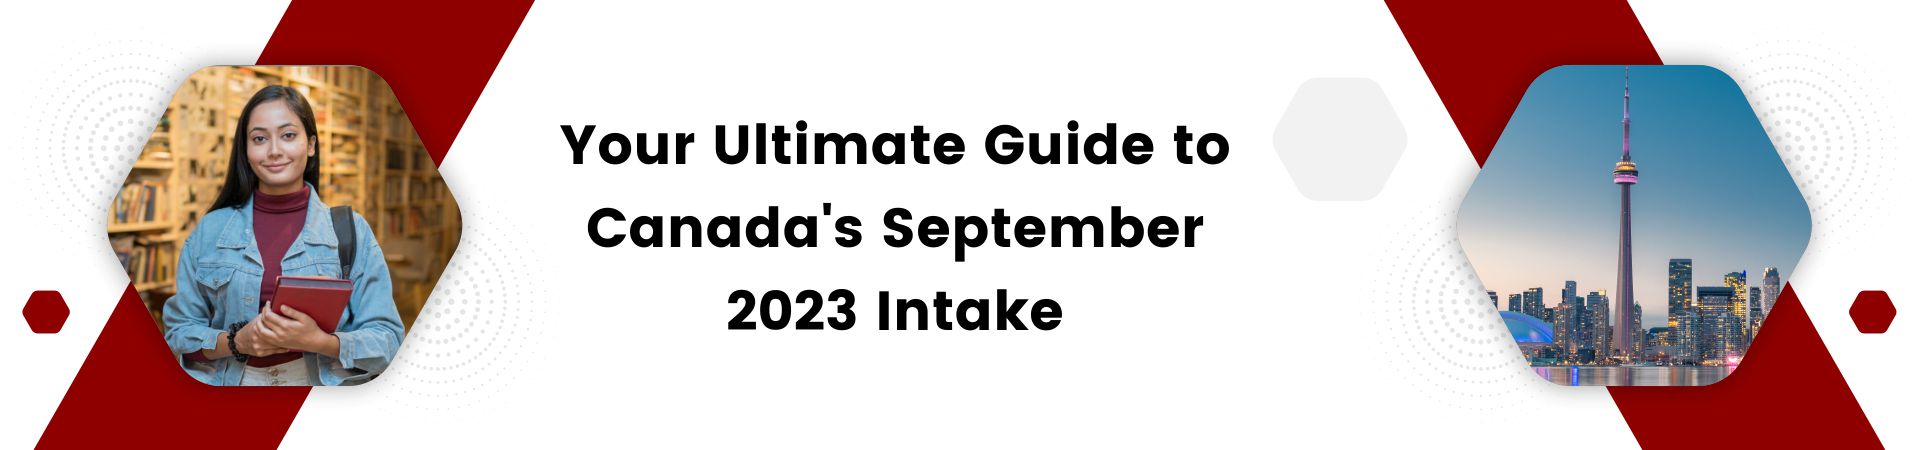 Your Ultimate Guide to Canada September 2023 Intake